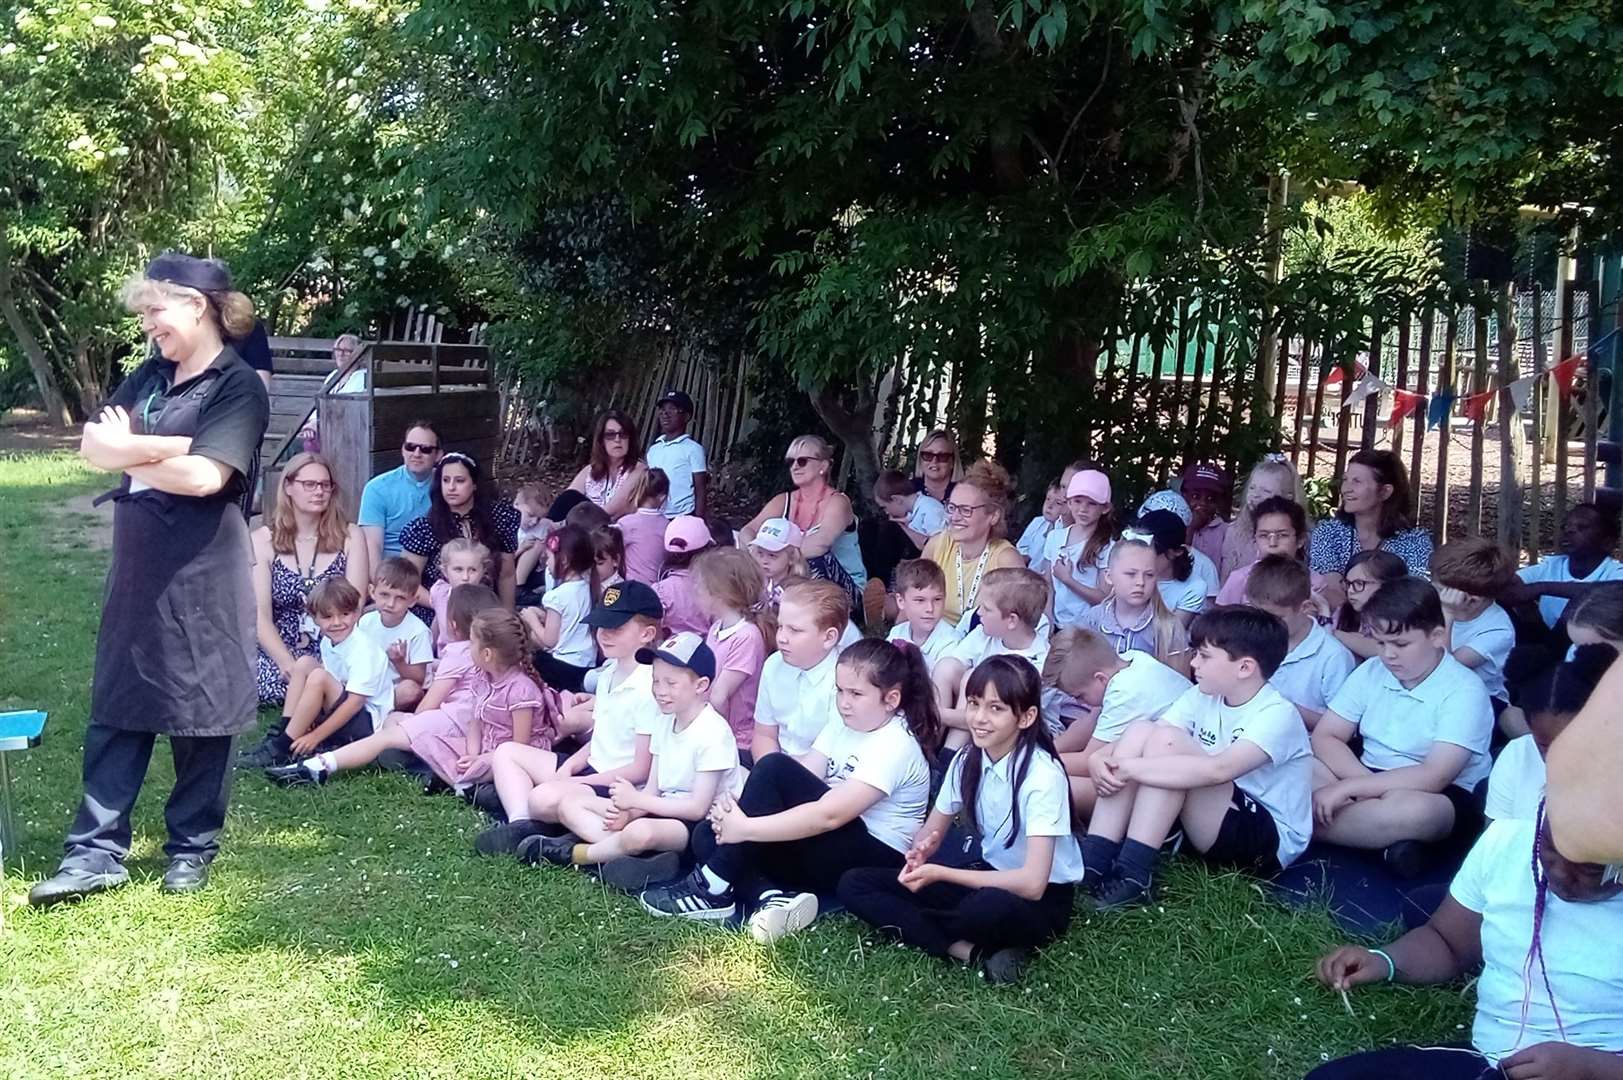 The children of Leeds and Broomfield Church of England School organised a surprise party for Polly's 80th birthday. Picture: Sharon Clark